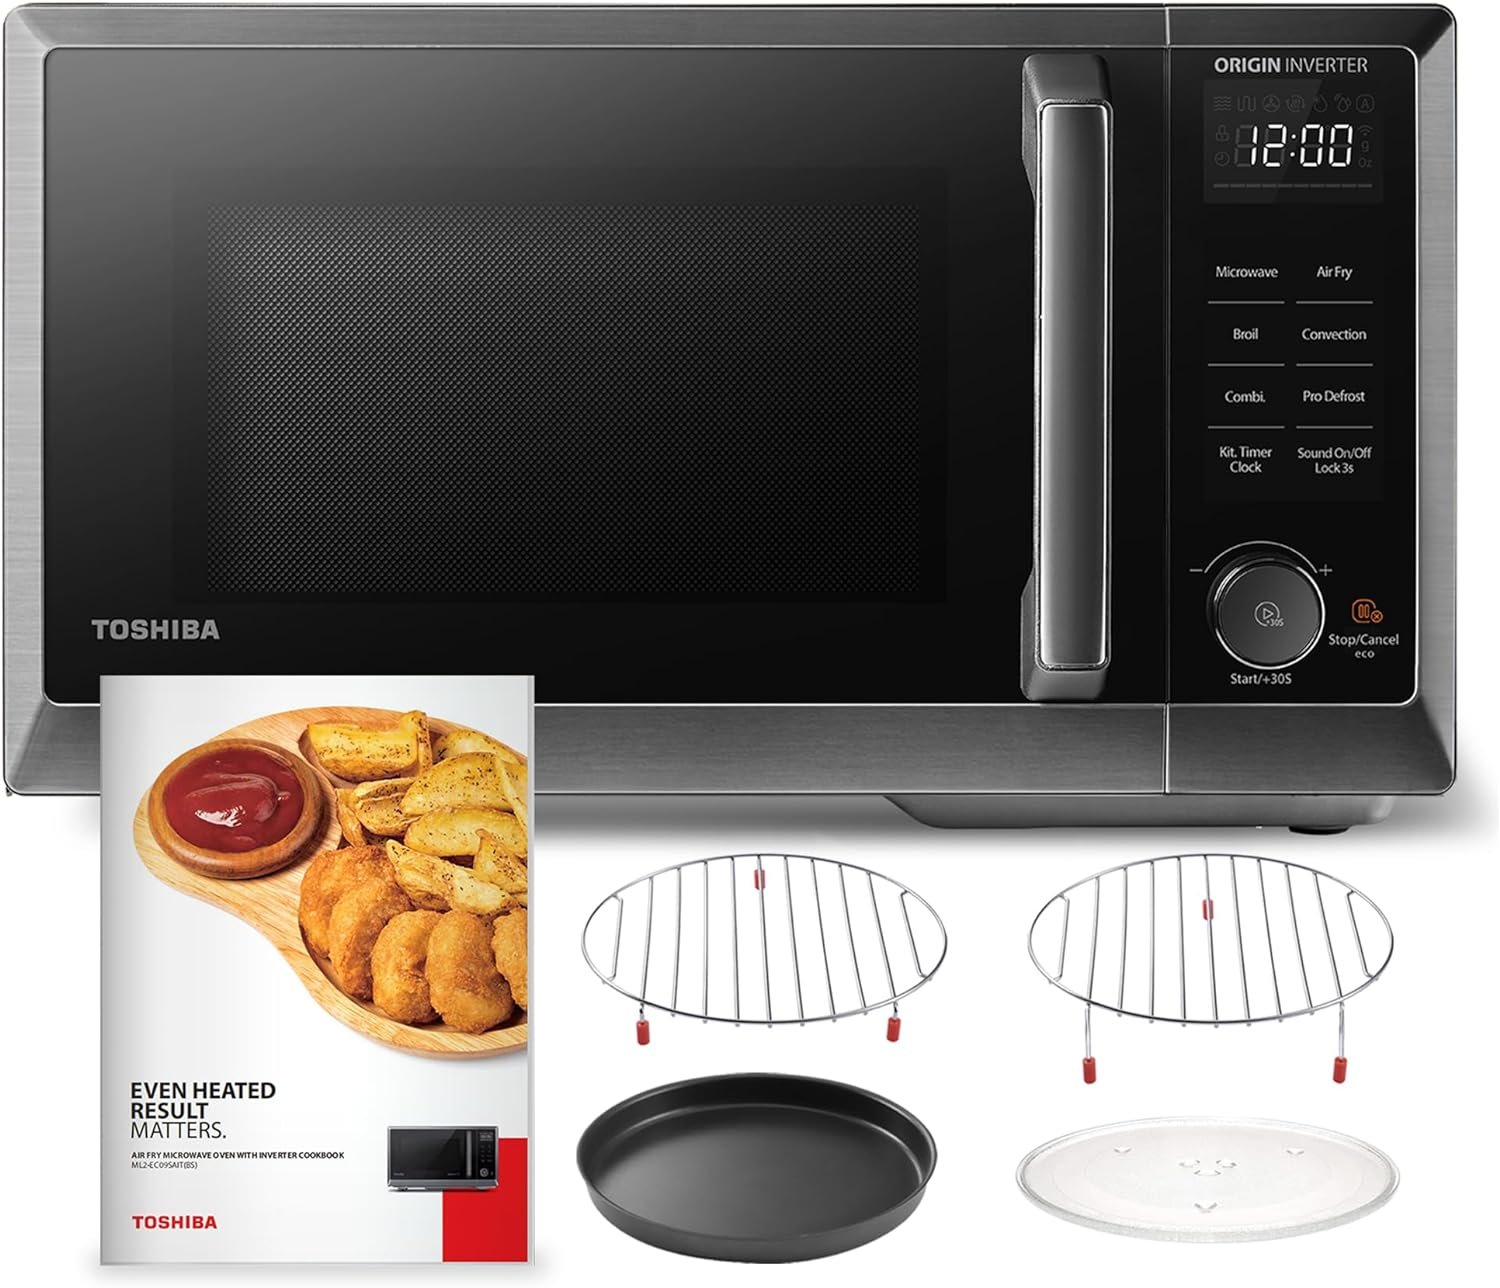 TOSHIBA 6-in-1 Inverter Countertop Microwave Oven Healthy Air Fryer Combo, MASTER Series, Broil, Convection, Speedy Combi, Even Defrost 11.3 Turntable Sound On/Off, 27 Auto Menu